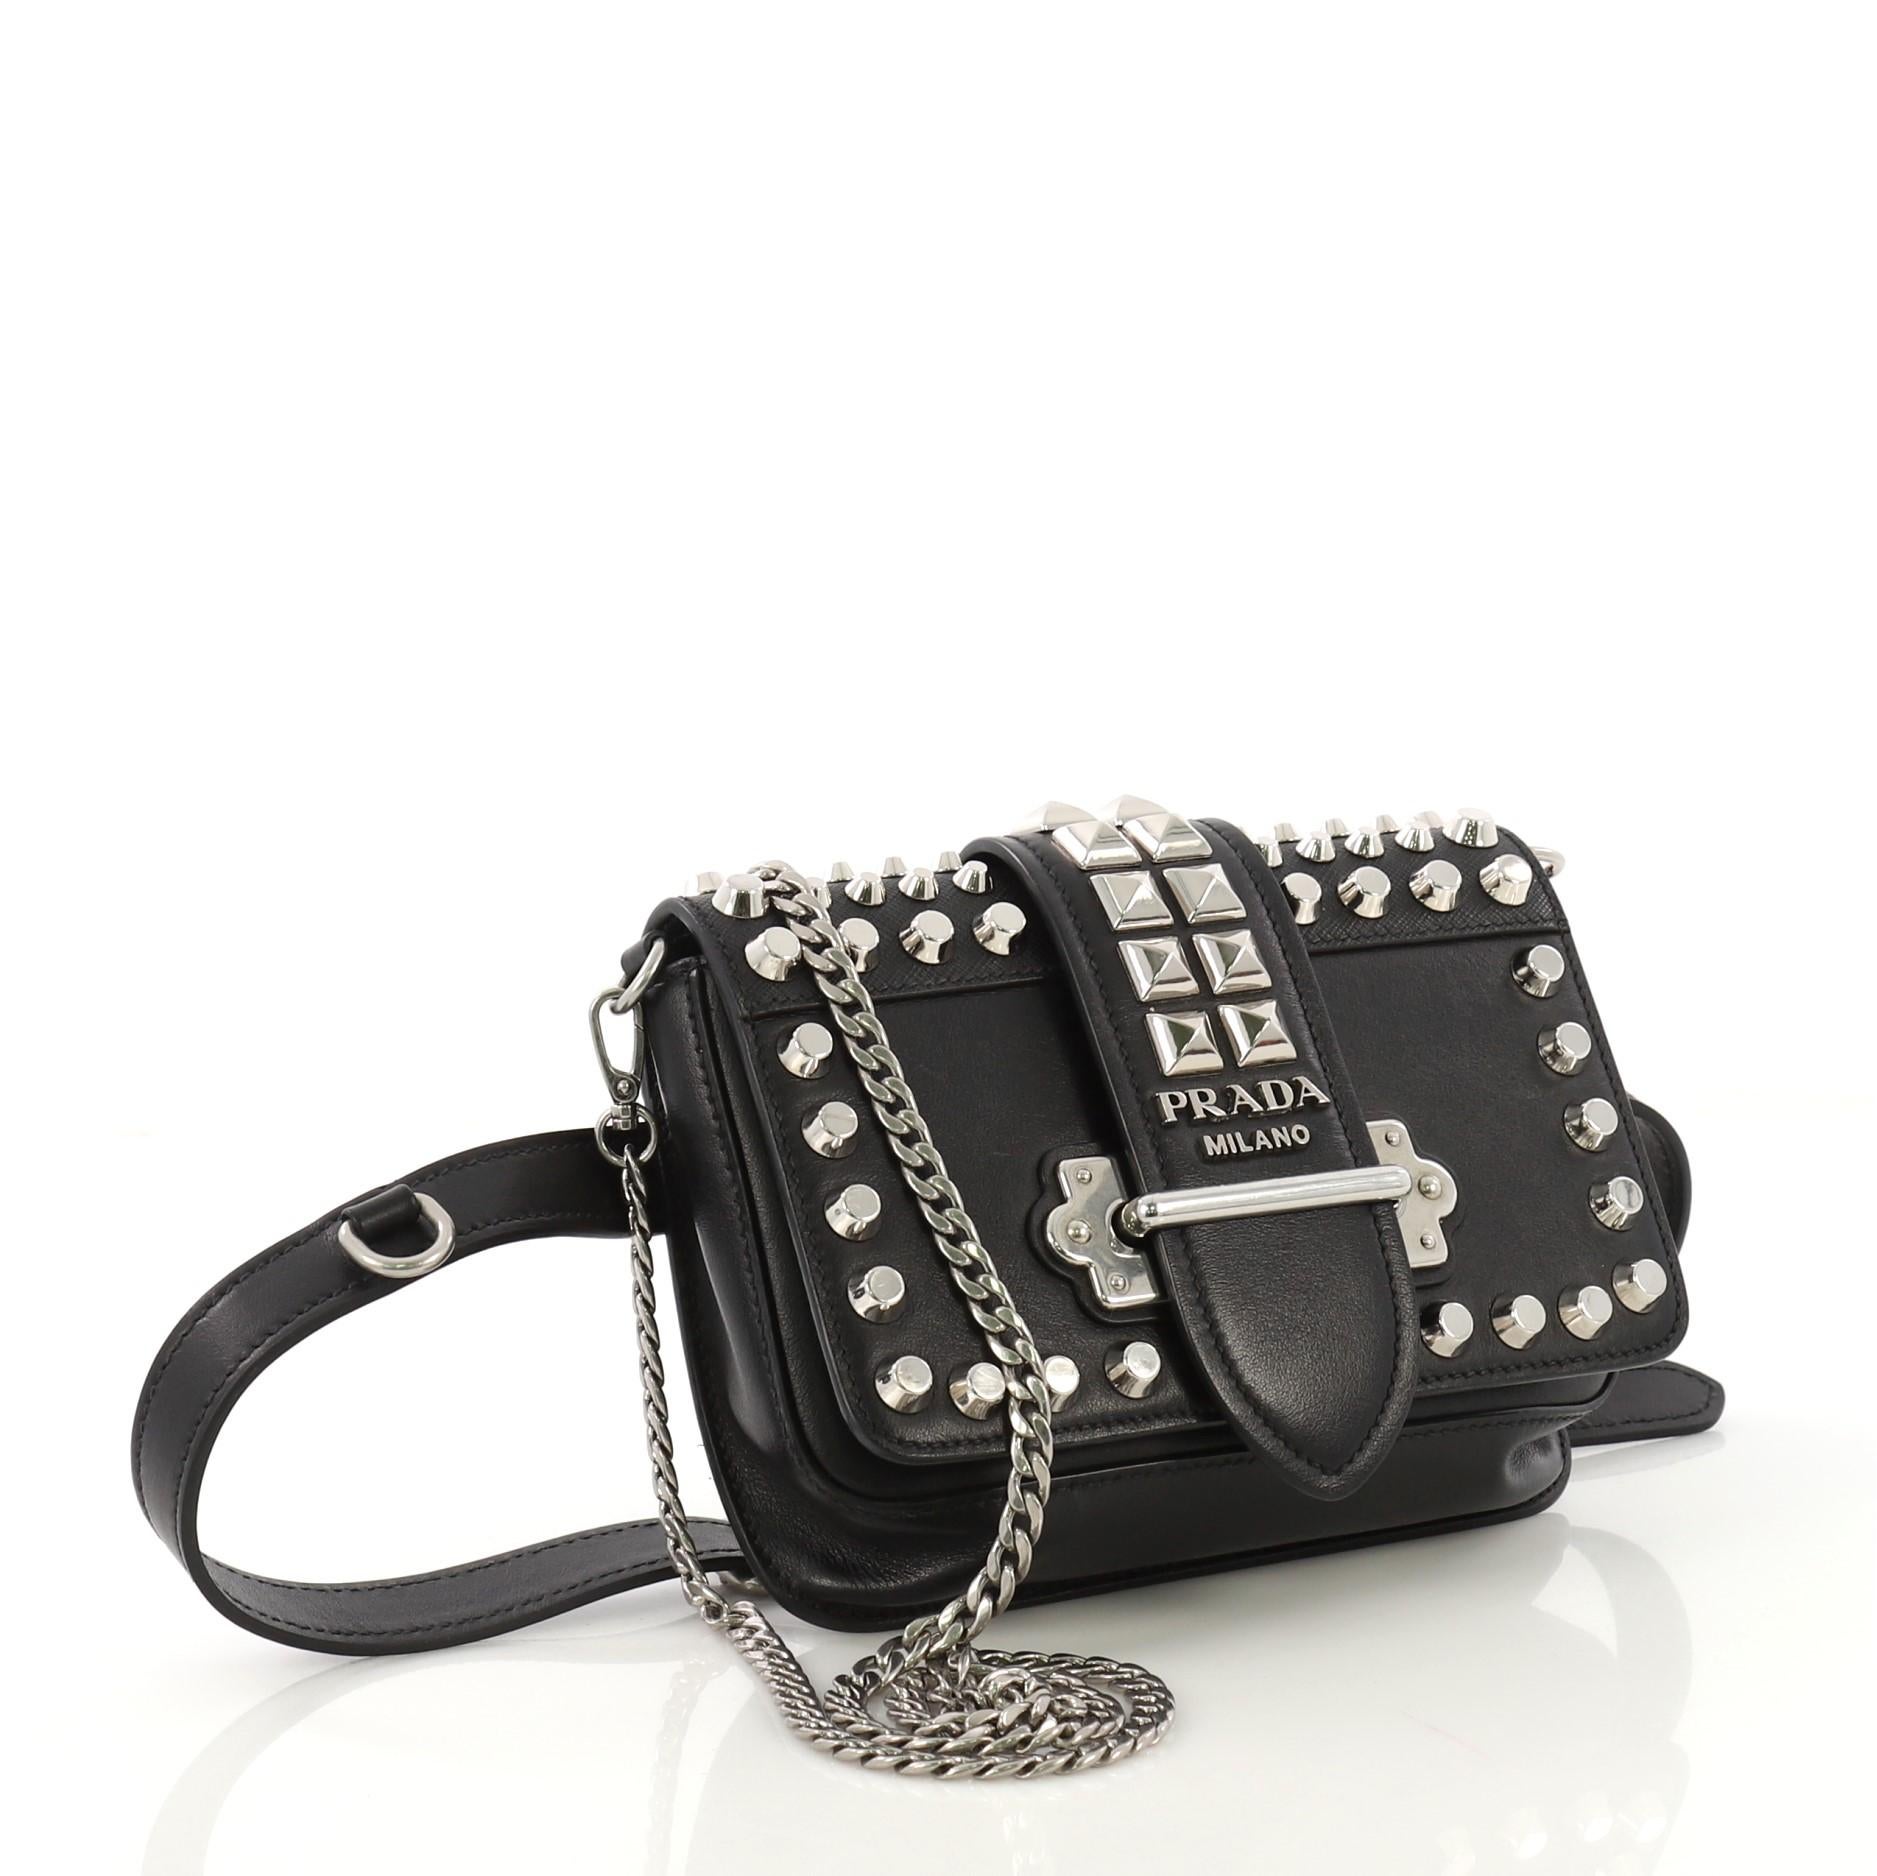 This Prada Cahier Belt Bag Studded City Calf with Saffiano Leather Small, crafted in black studded city calf with saffiano leather, features chain link strap, adjustable belt strap, stud embellishments, and silver-tone hardware. Its front flap with